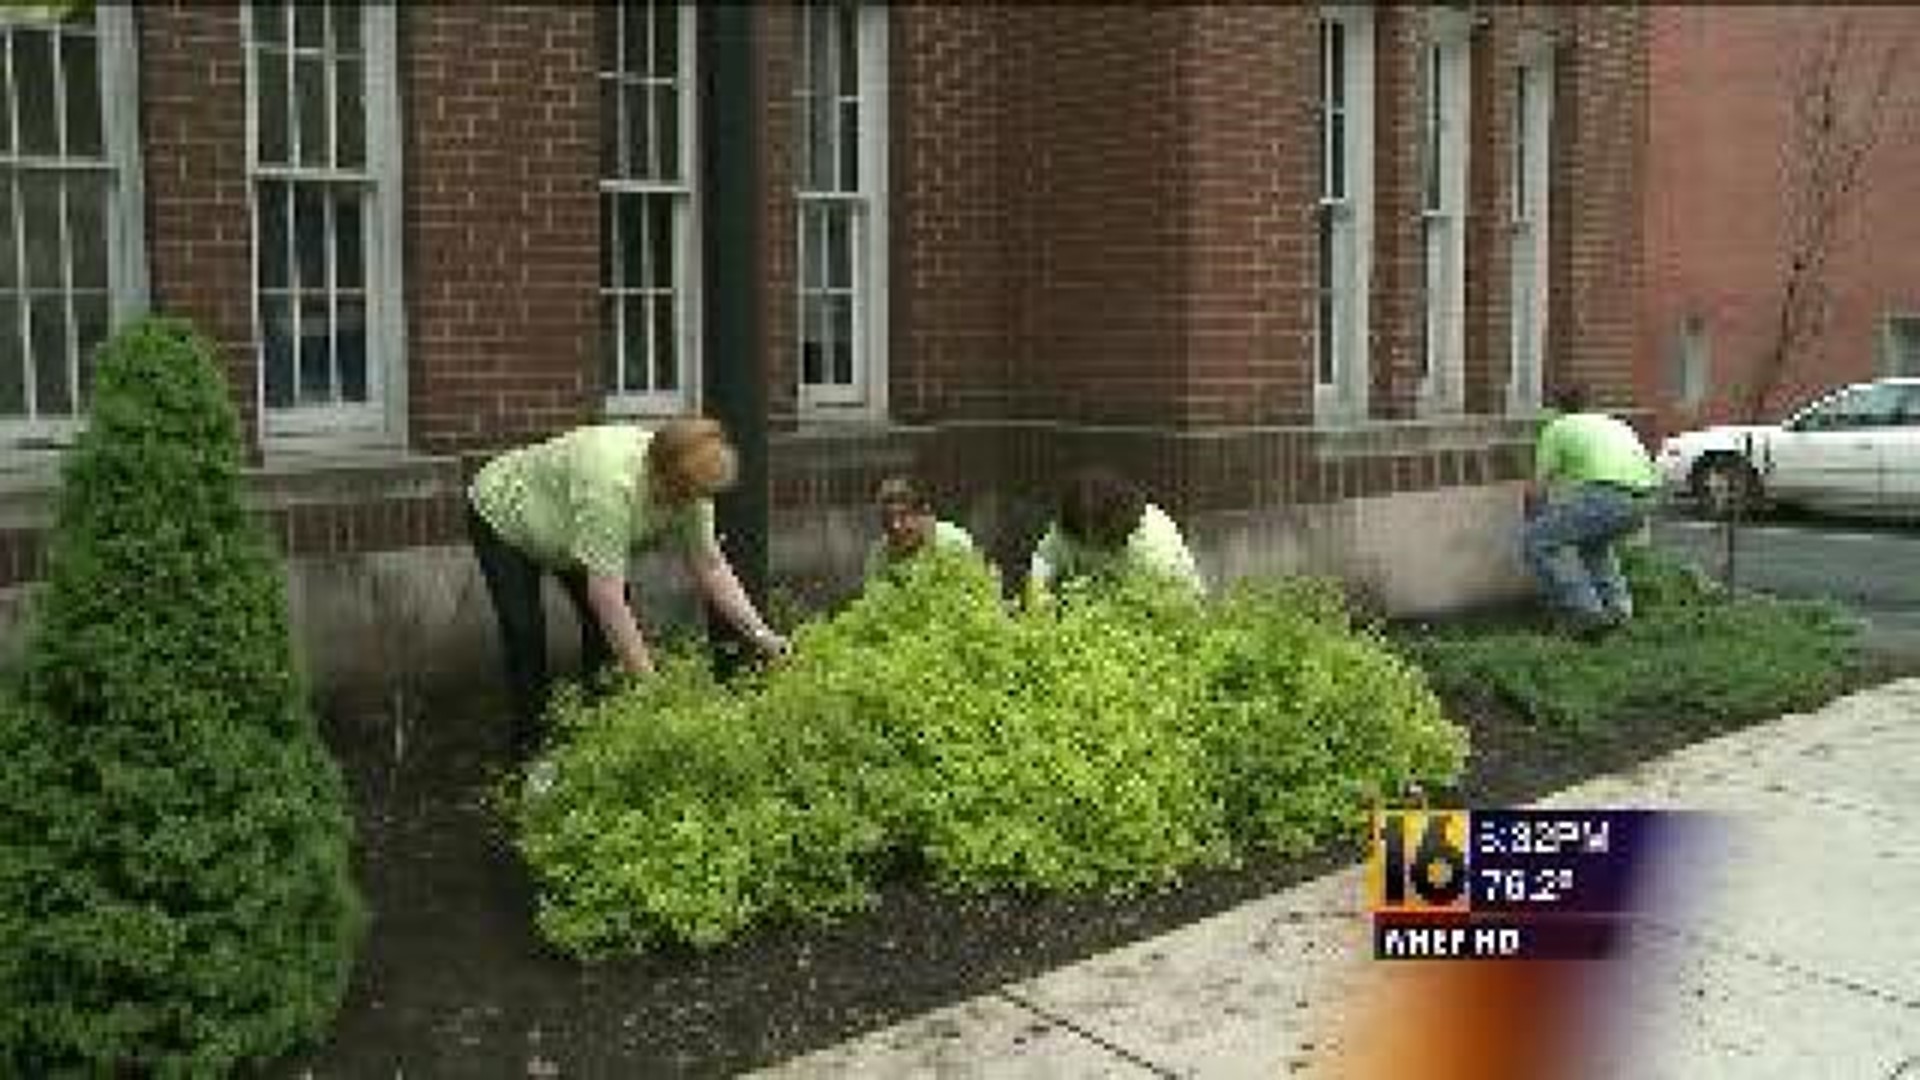 A Day Of Caring In Schuylkill County